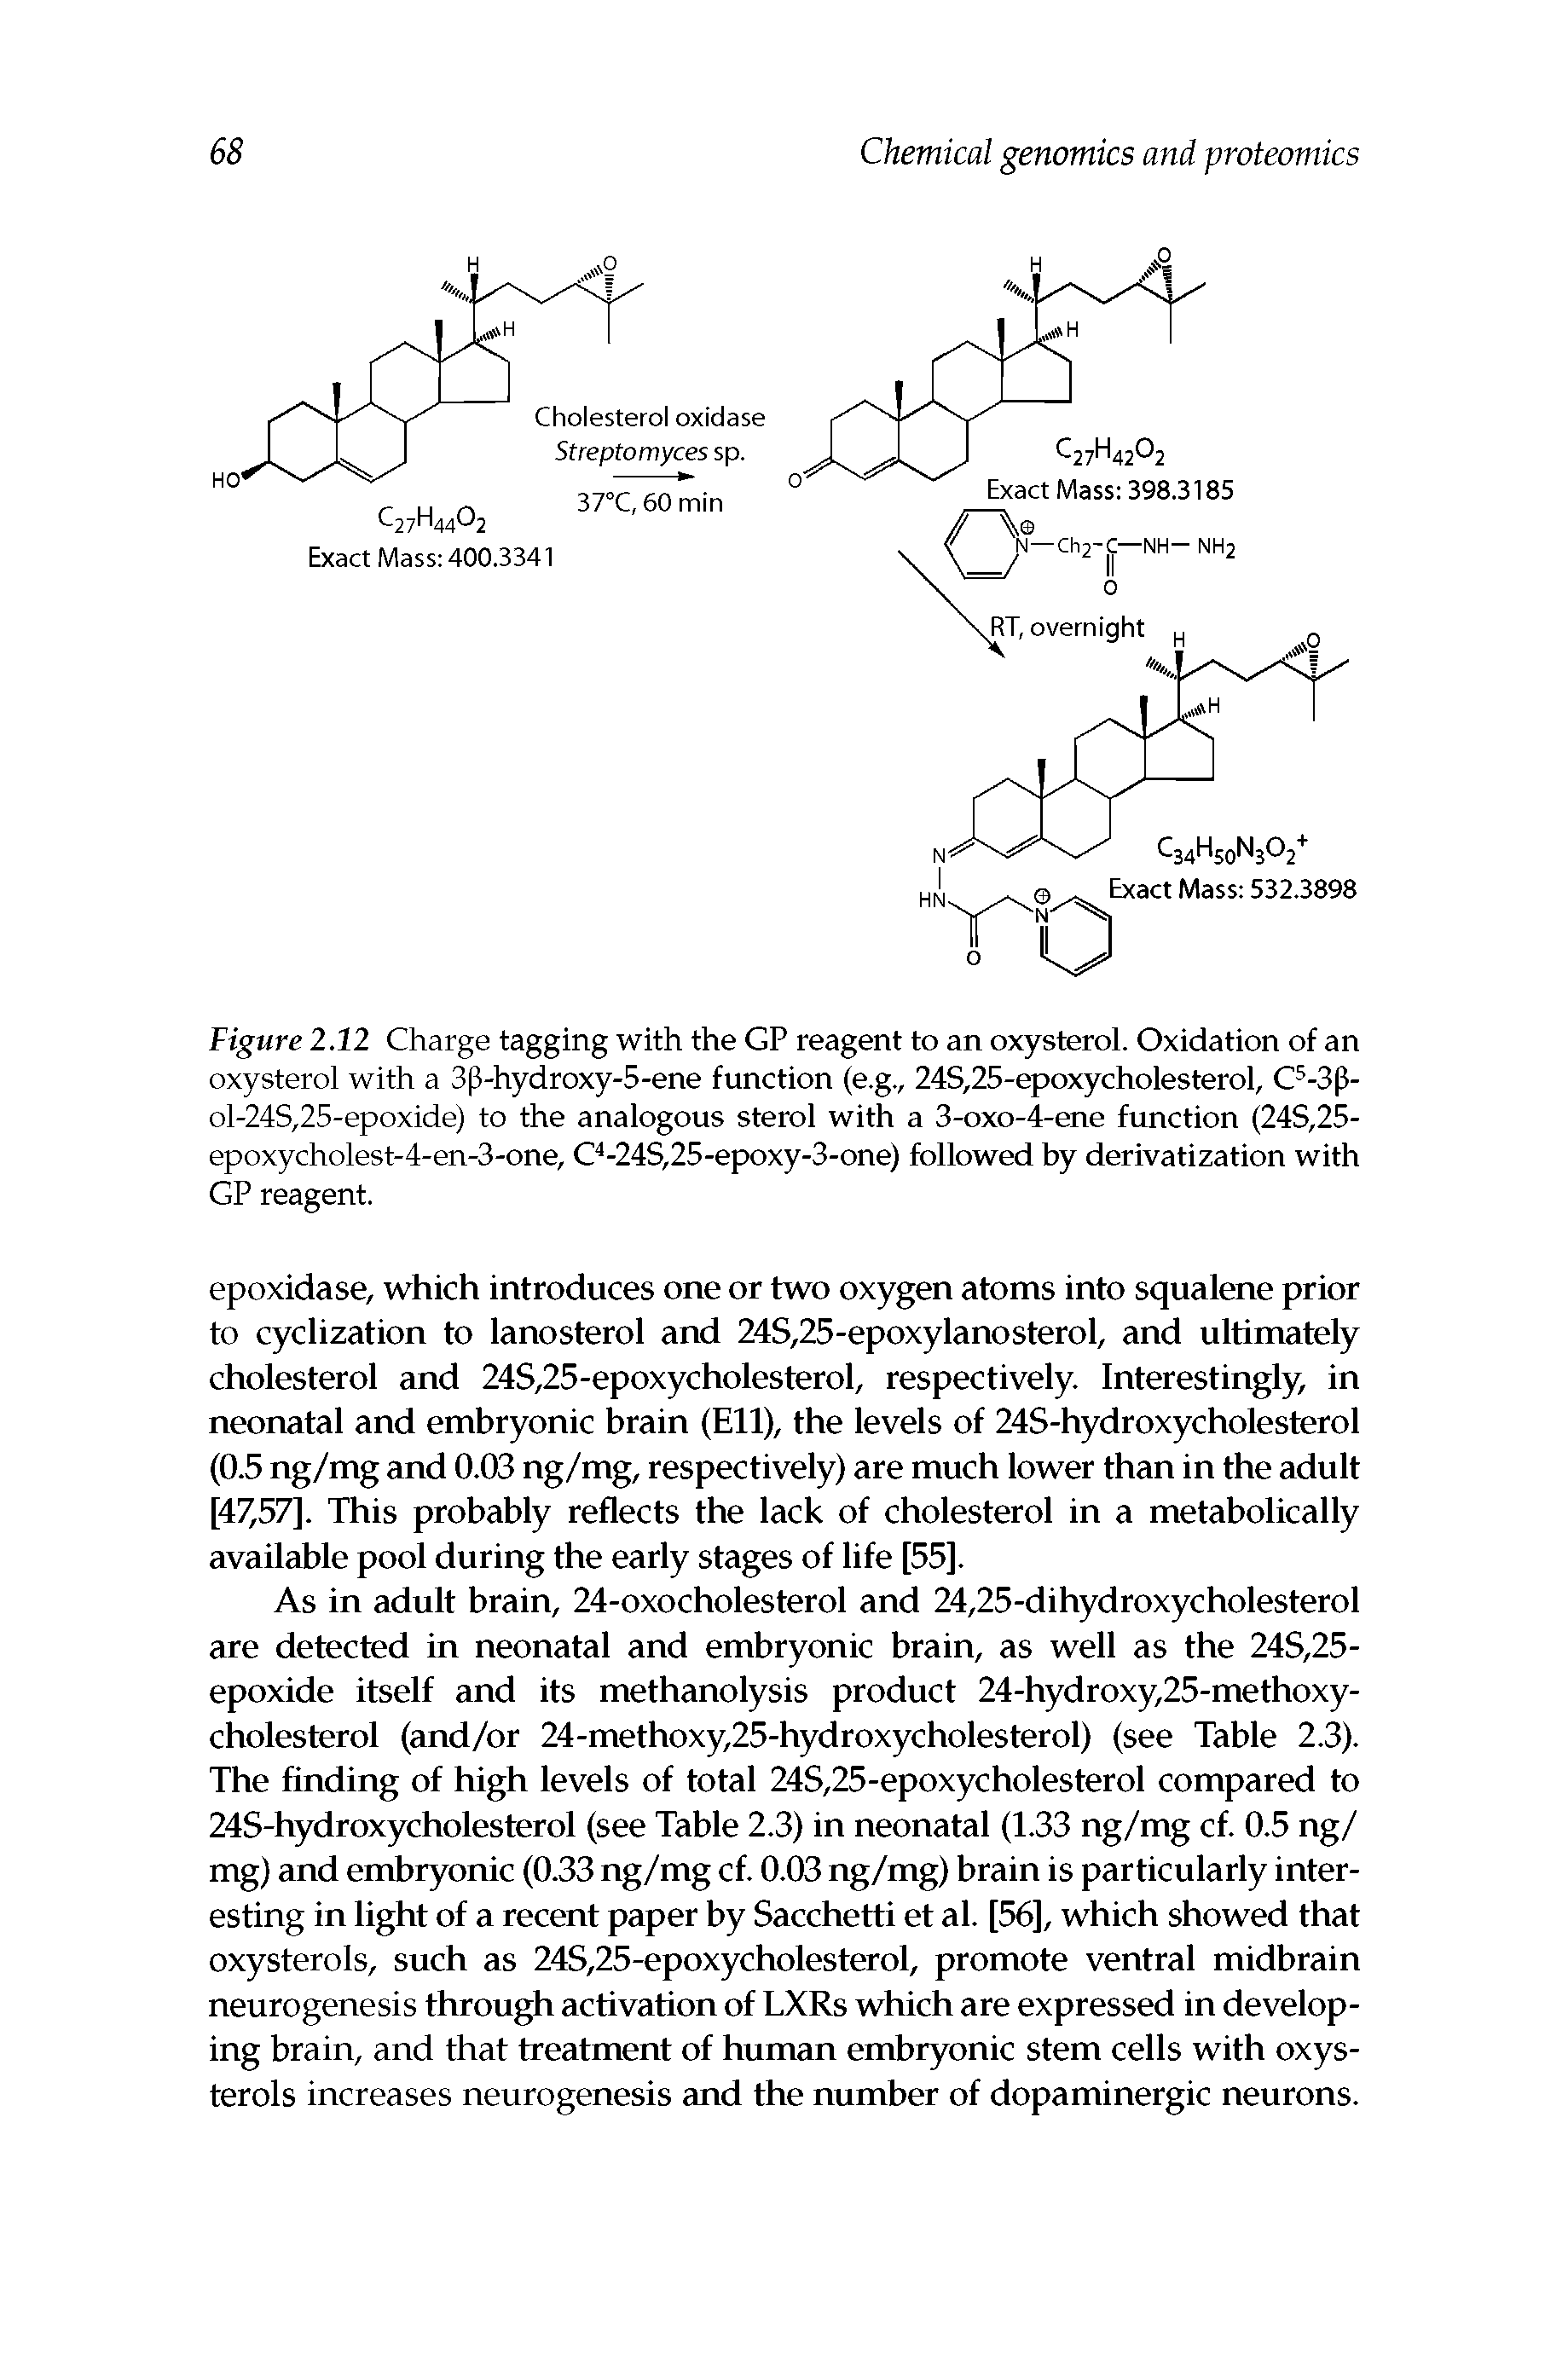 Figure 2.12 Charge tagging with the GP reagent to an oxysterol. Oxidation of an oxysterol with a 3p-hydroxy-5-ene function (e.g., 24S,25-epoxycholesterol, C -3p-ol-24S,25-epoxide) to the analogous sterol with a 3-oxo-4-ene function (24S,25-epoxycholest-4-en-3-one, C -24S,25-epoxy-3-one) followed by derivatization with GP reagent.